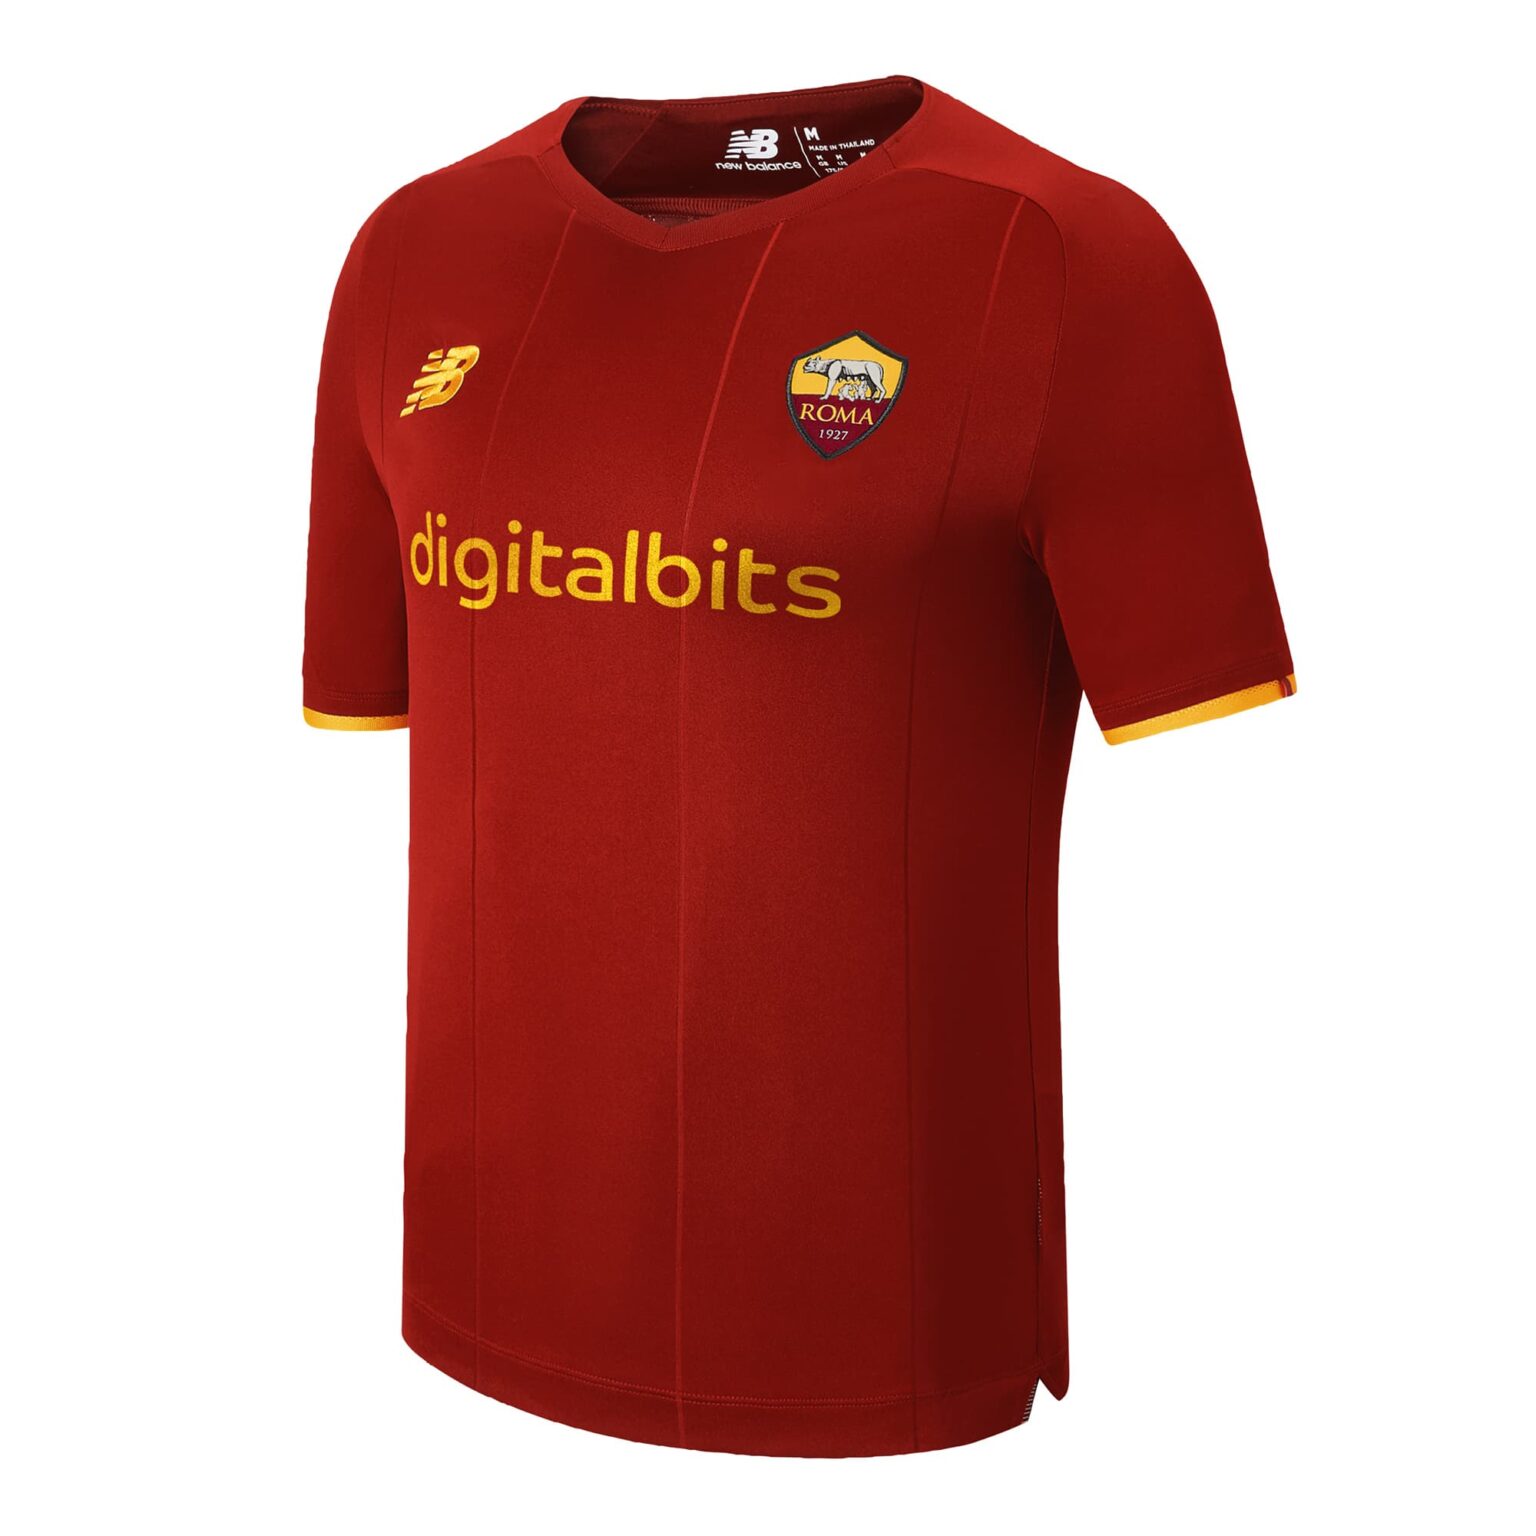 AS Roma 21/22 Home Kit Released By New Balance | Sustain Health Magazine